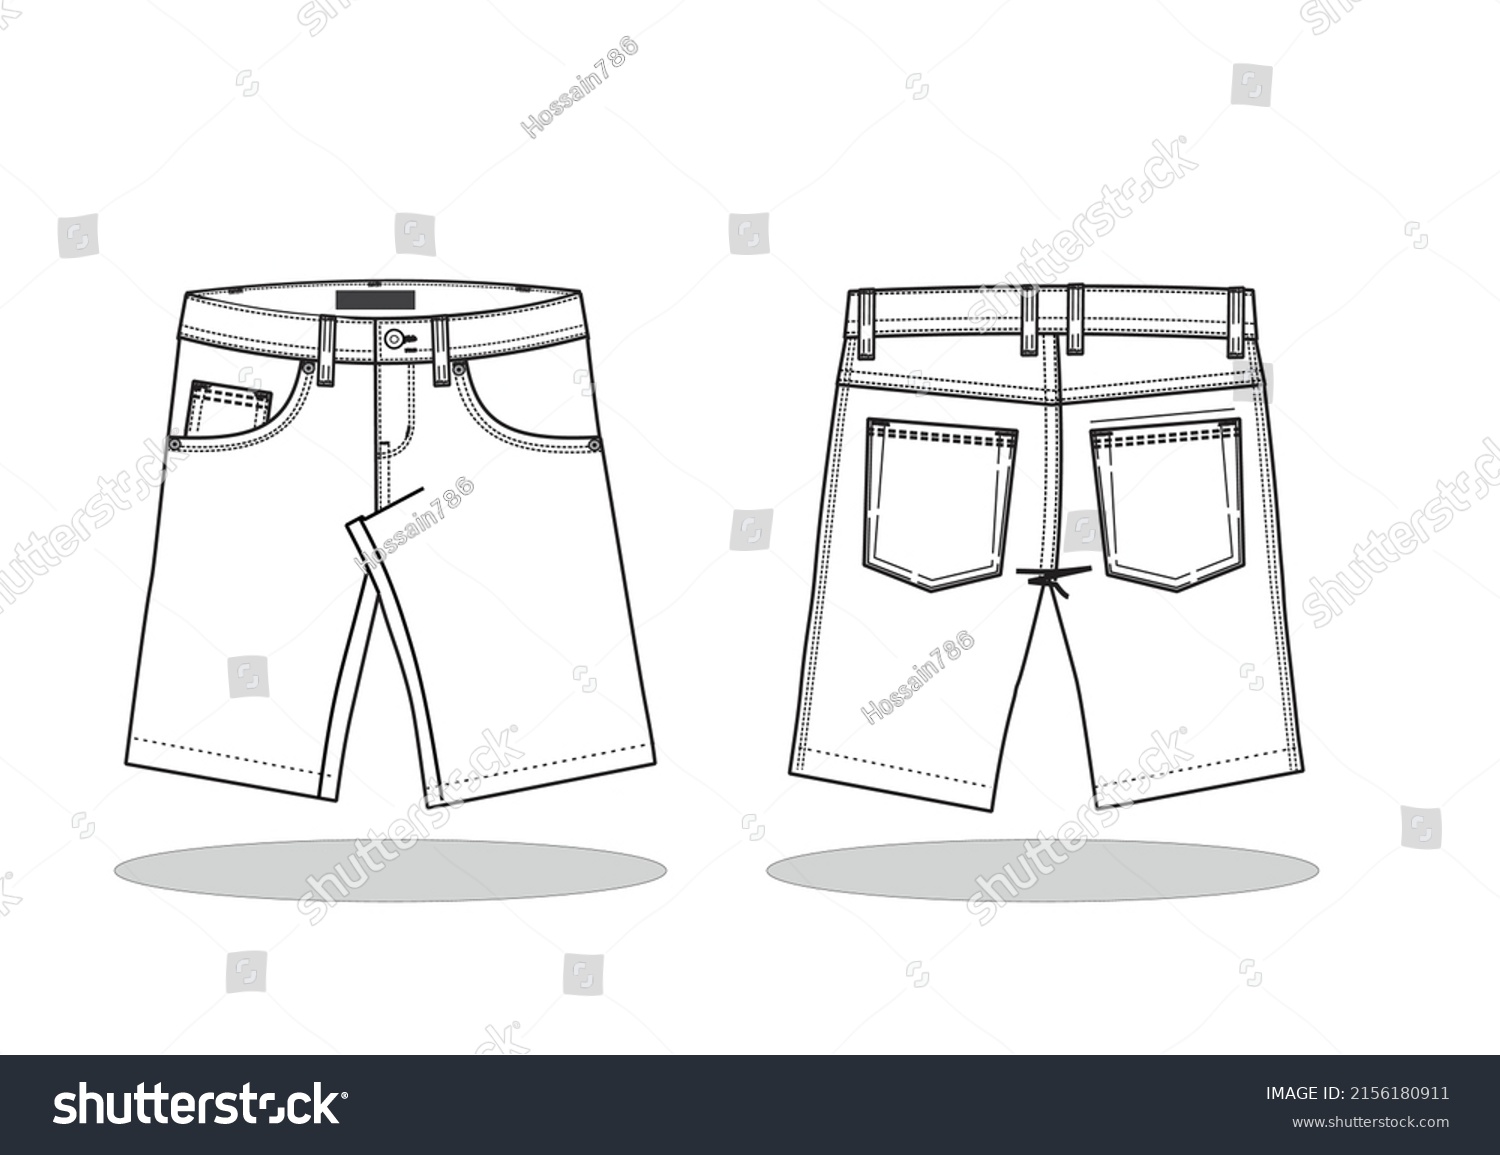 Short Pant Fashion Flat Sketch Template Stock Vector (Royalty Free ...